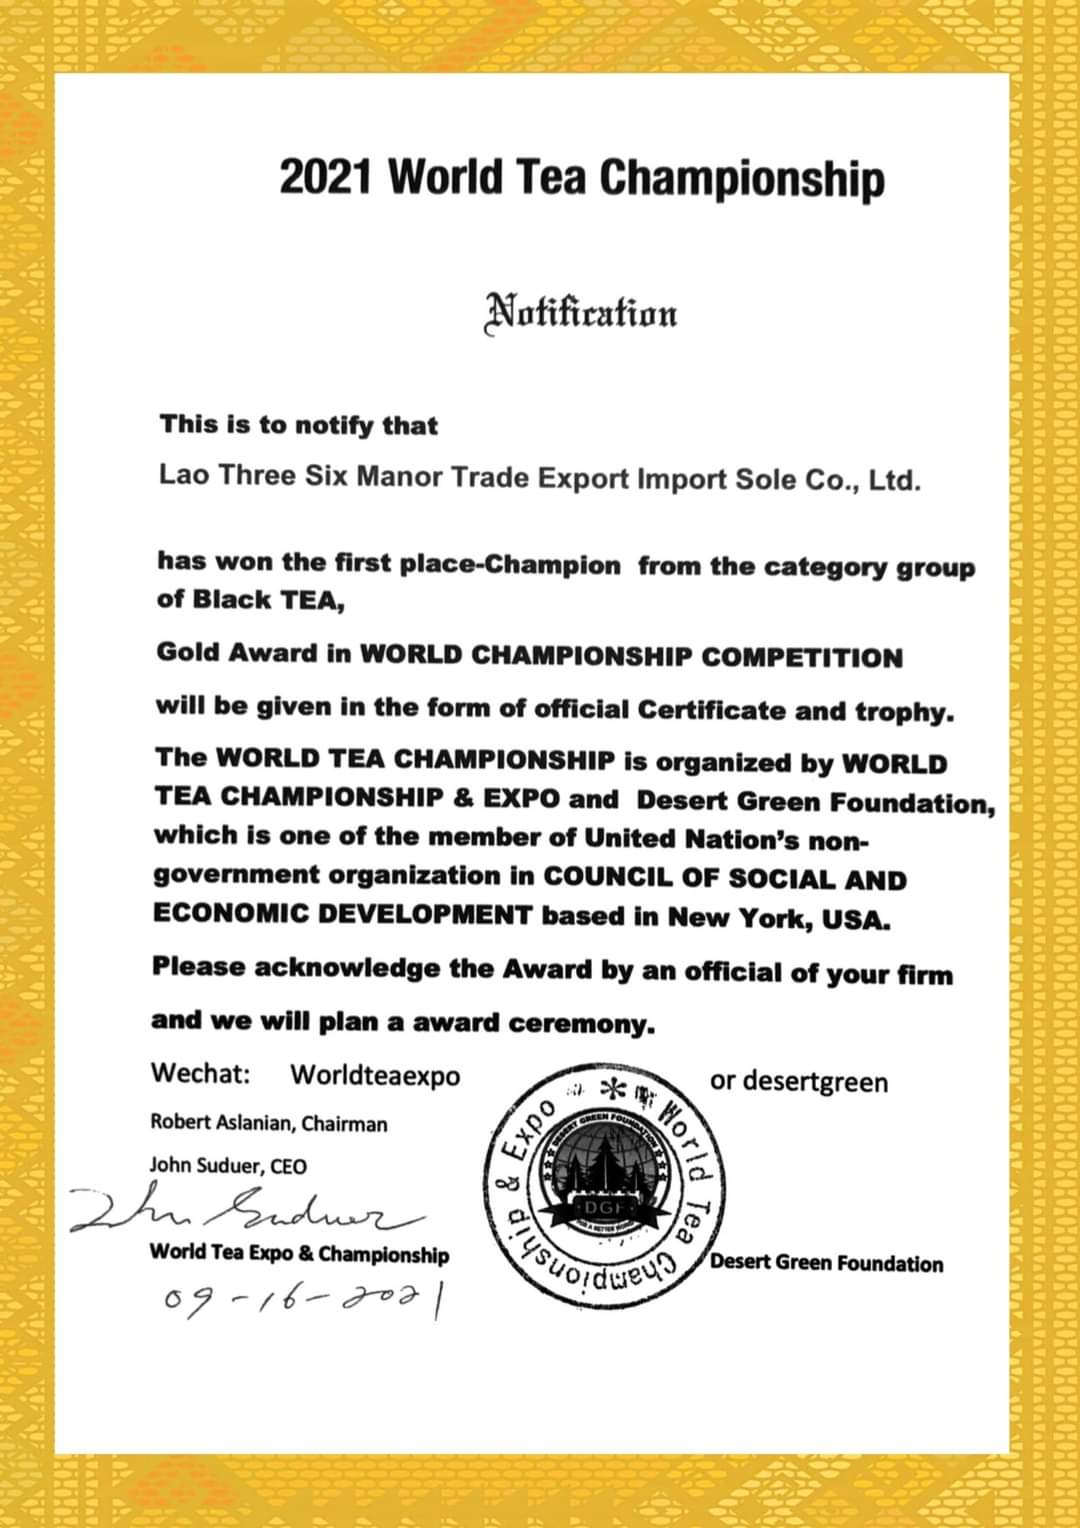 On 16 September 2021, 36 Manor from the Lao PDR were awarded the gold medal of the 2021 World Tea Championship